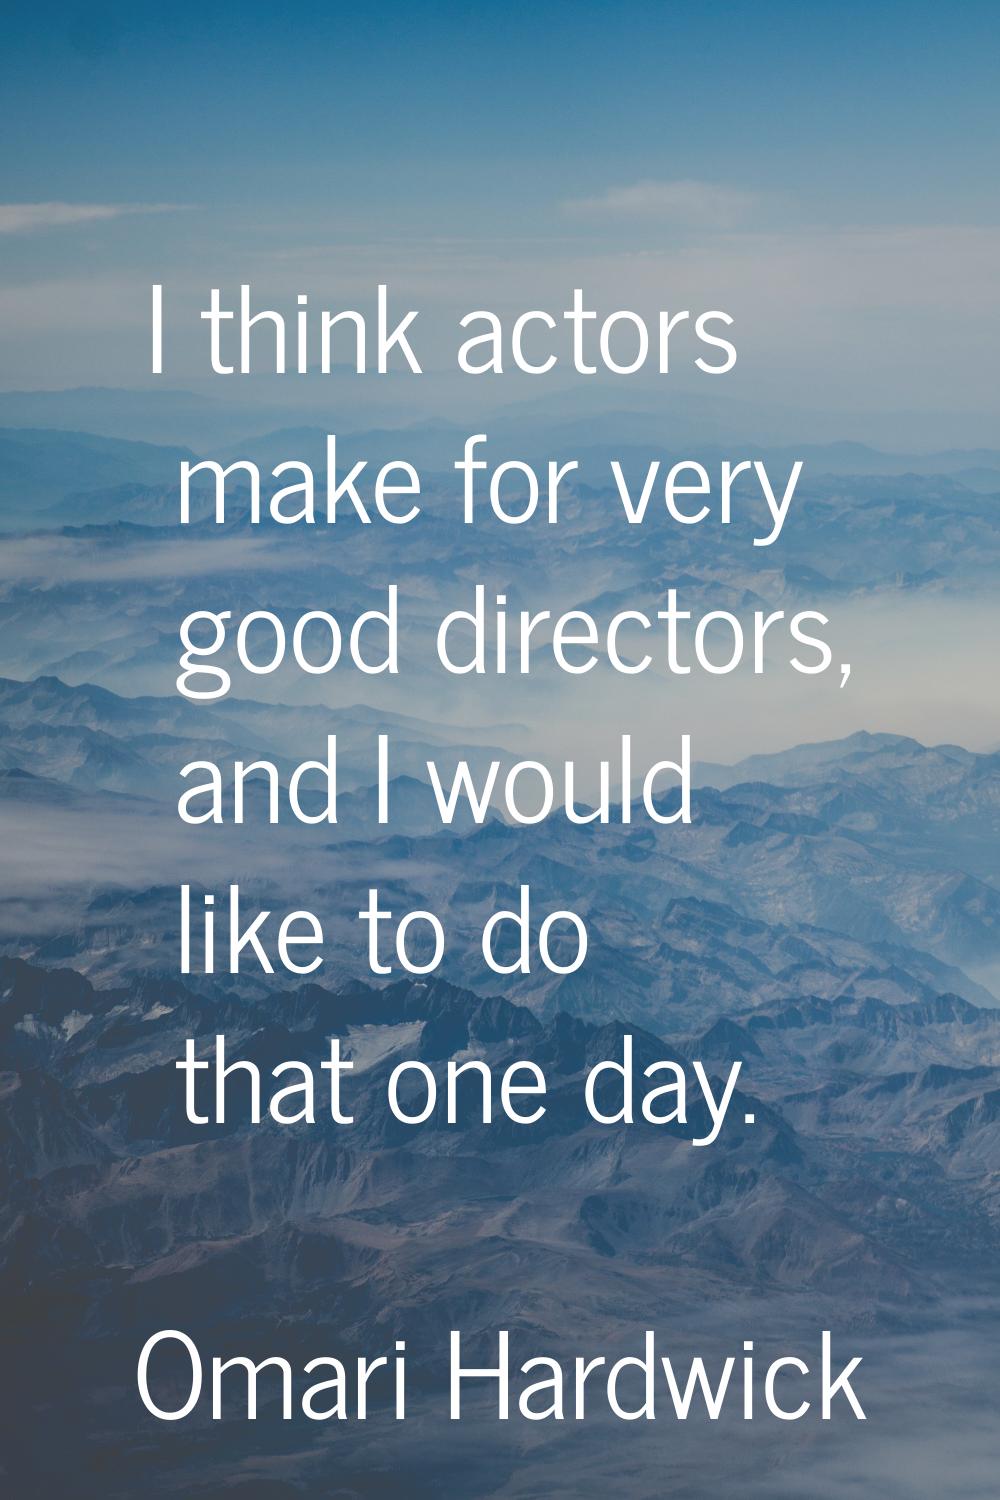 I think actors make for very good directors, and I would like to do that one day.